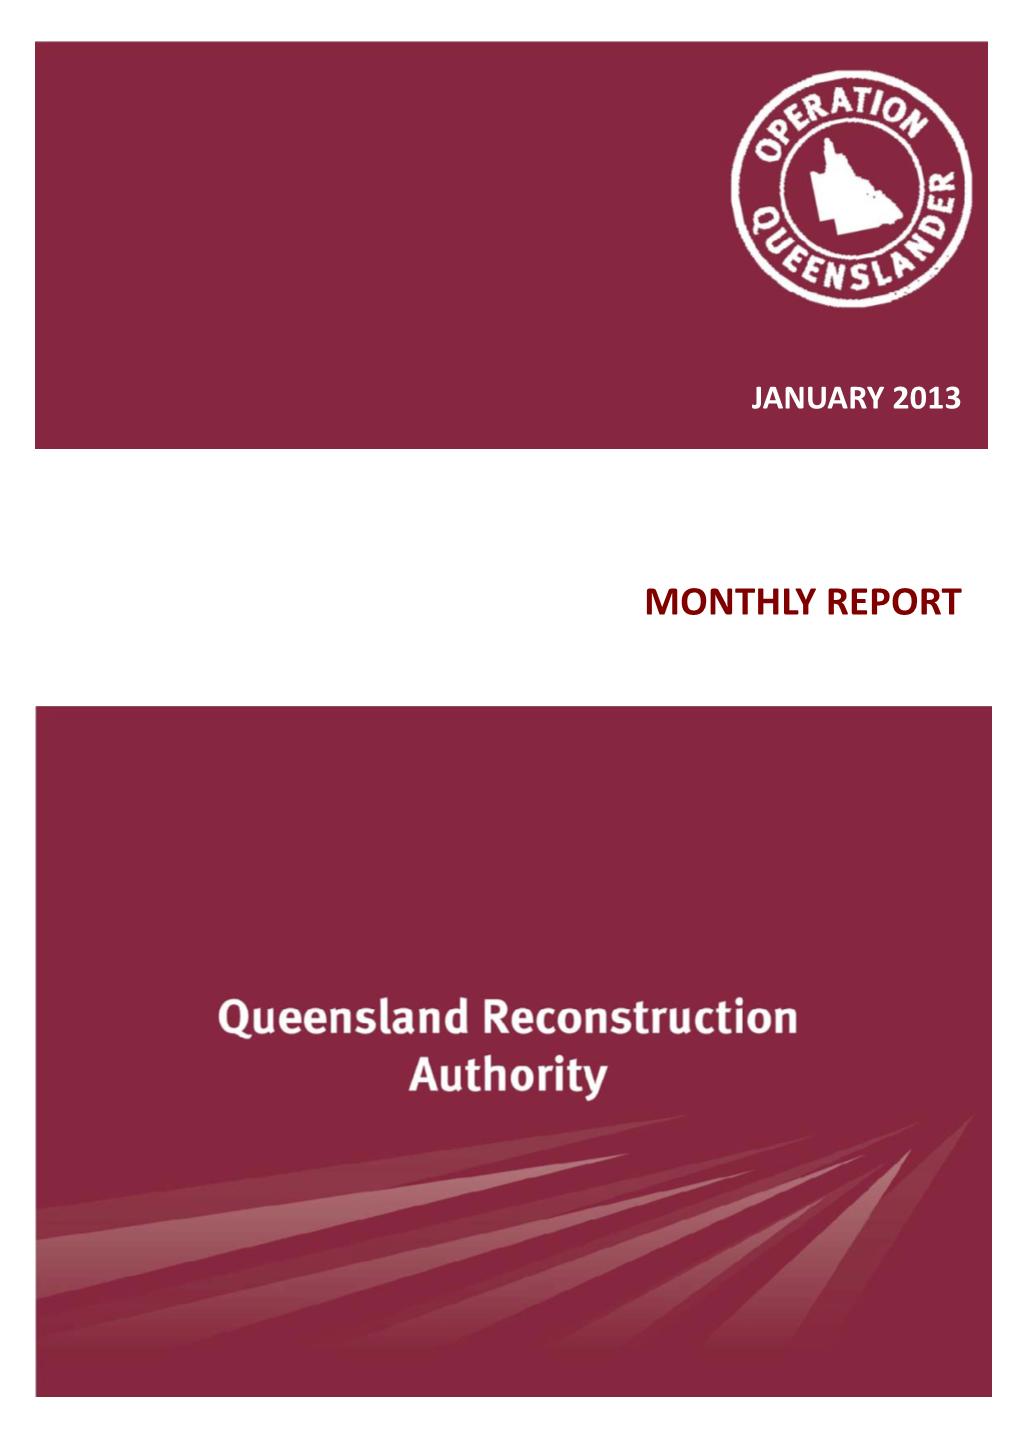 Monthly Report January 2013